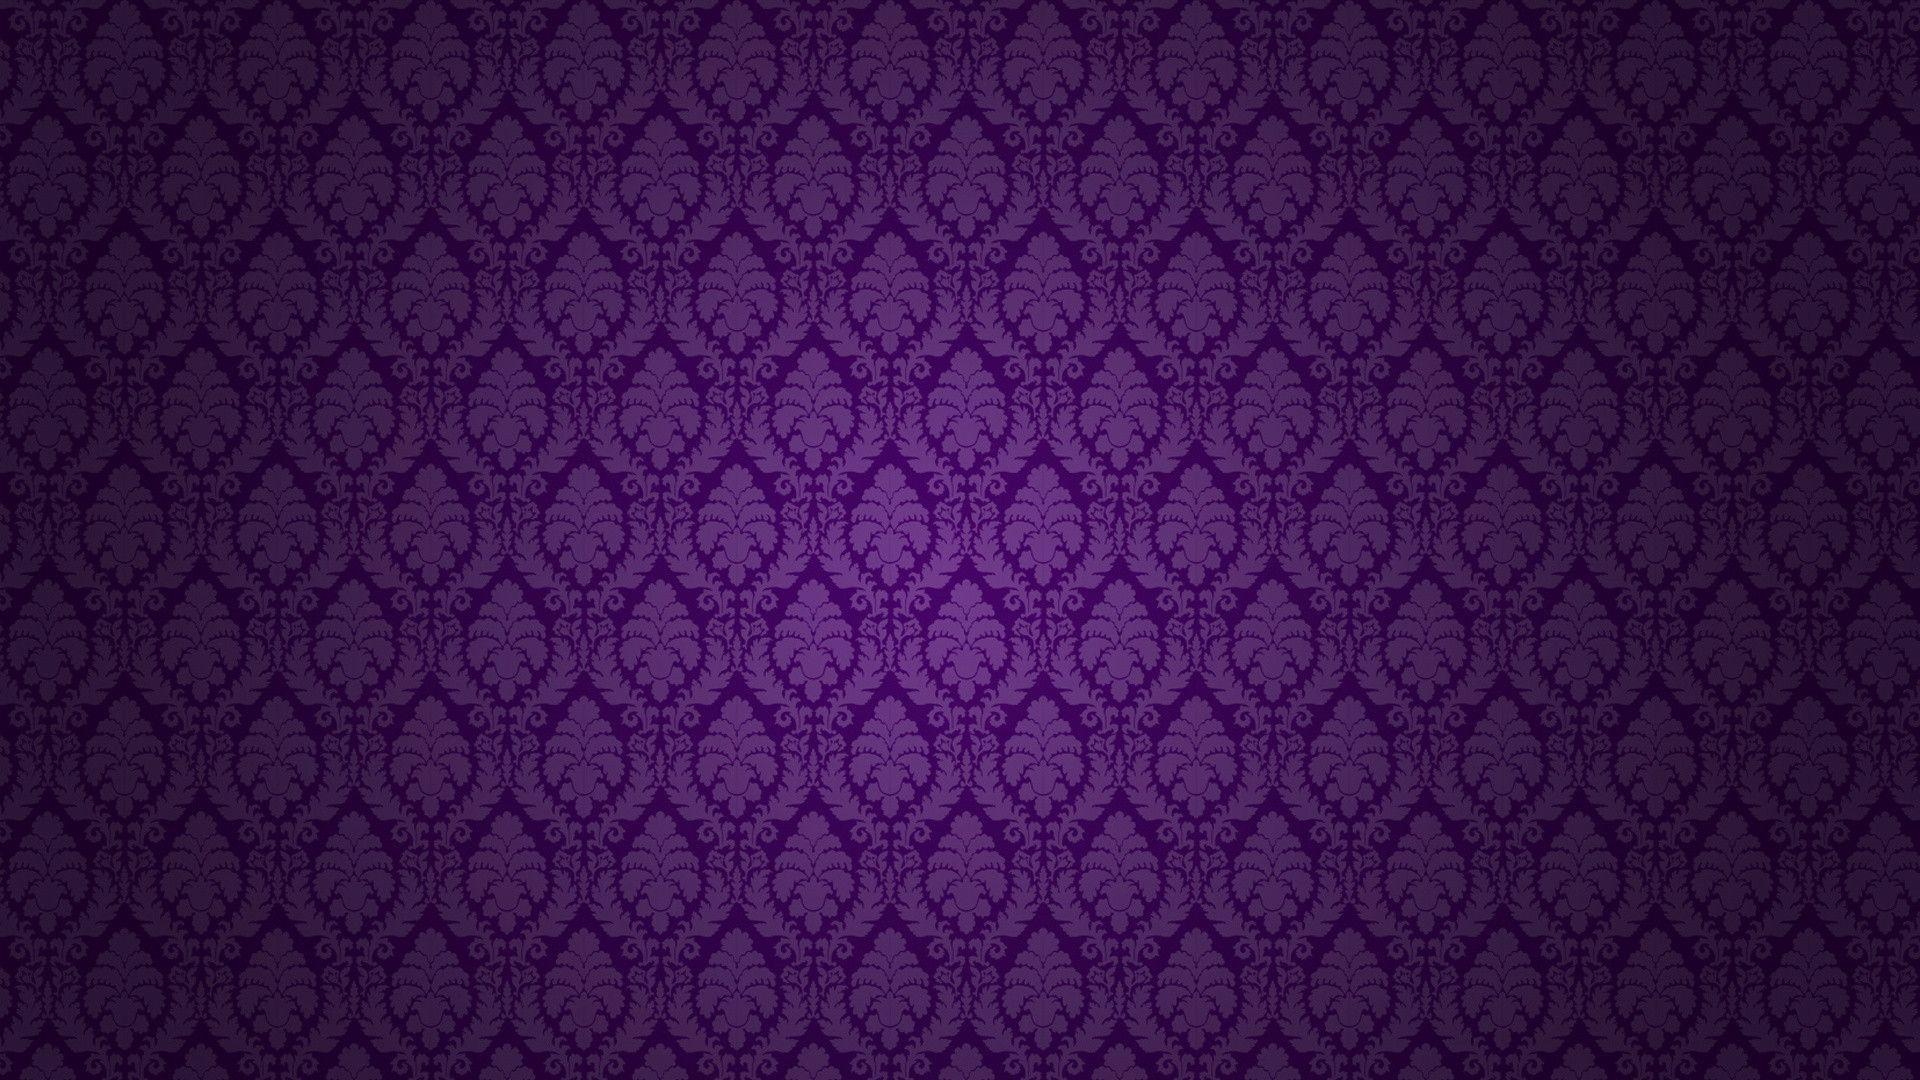 High Definition Purple Wallpaper Image for Free Download